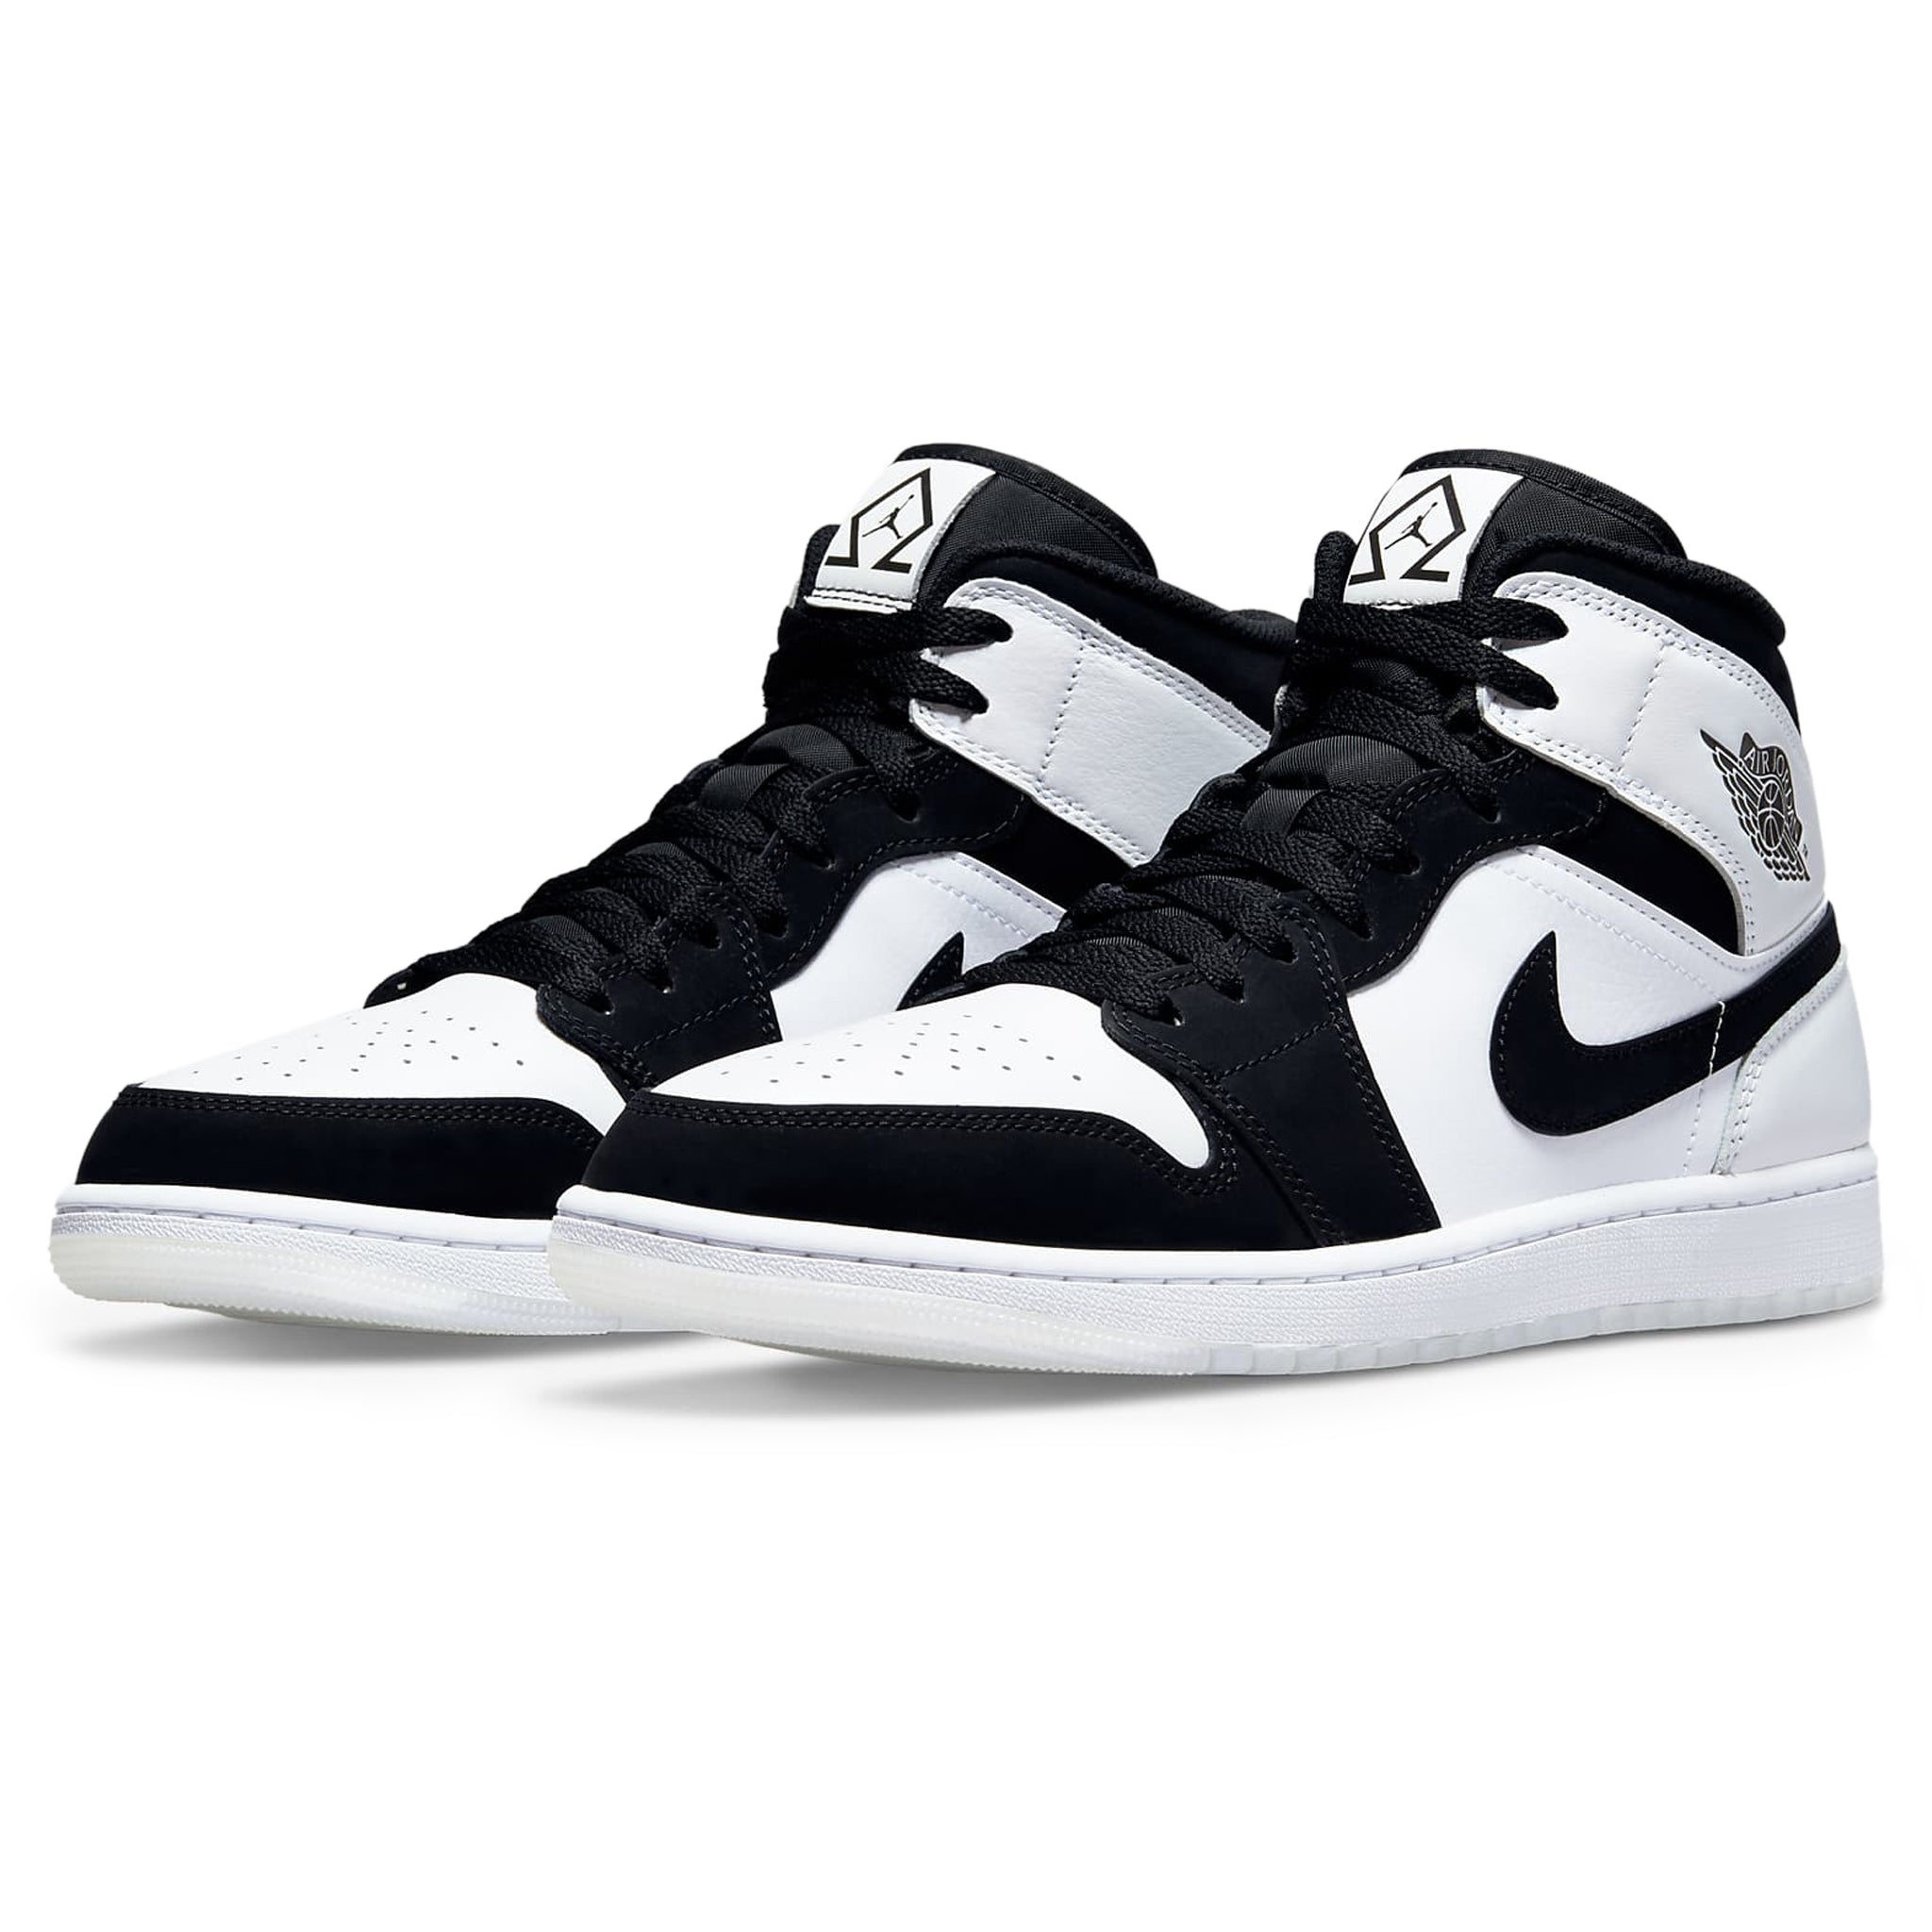 Front side view of Air Jordan 1 Mid Diamond Shorts DH6933-100